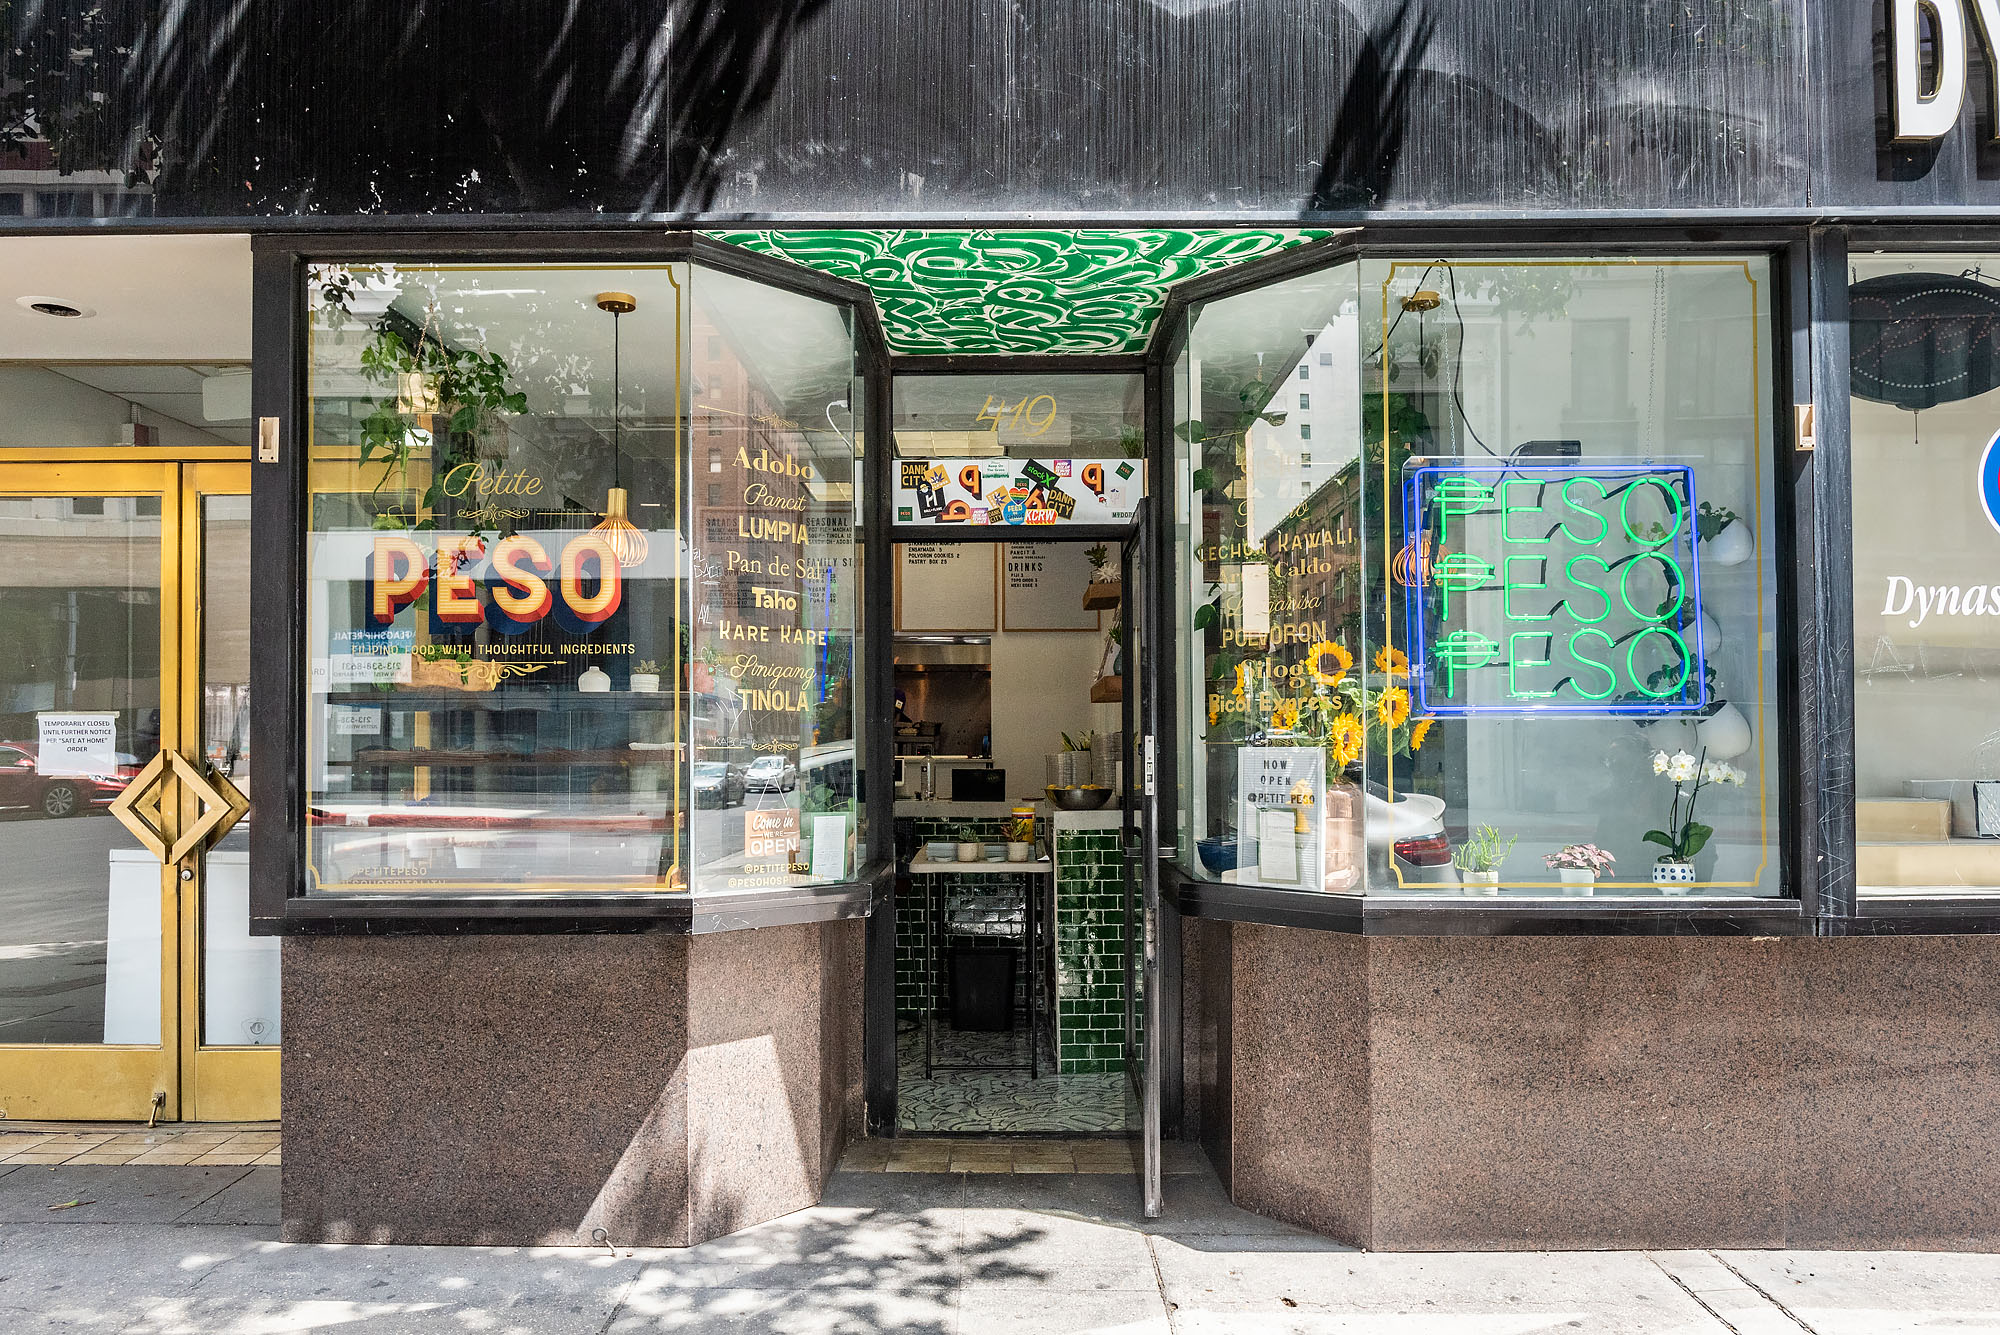 The exterior of Petite Peso, the small Downtown LA restaurant.